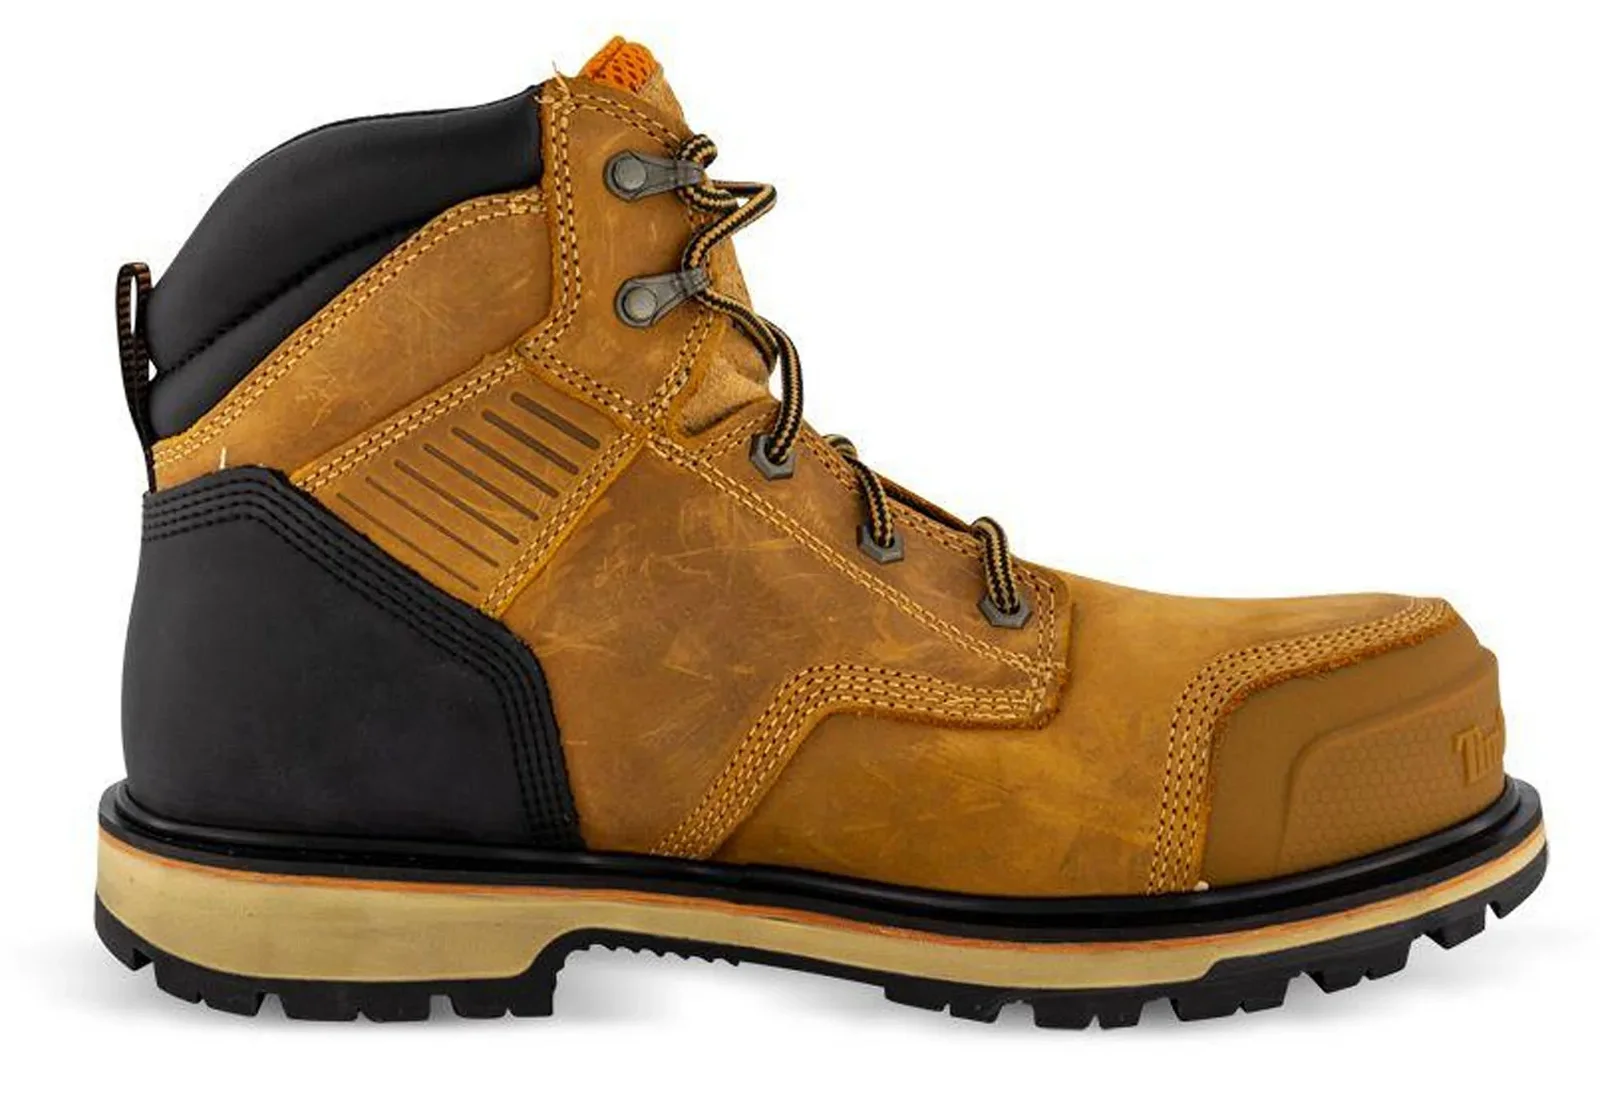 Image of Timberland Mens Pro Ballast 6 Inch Steel Toe Leather Work Boots